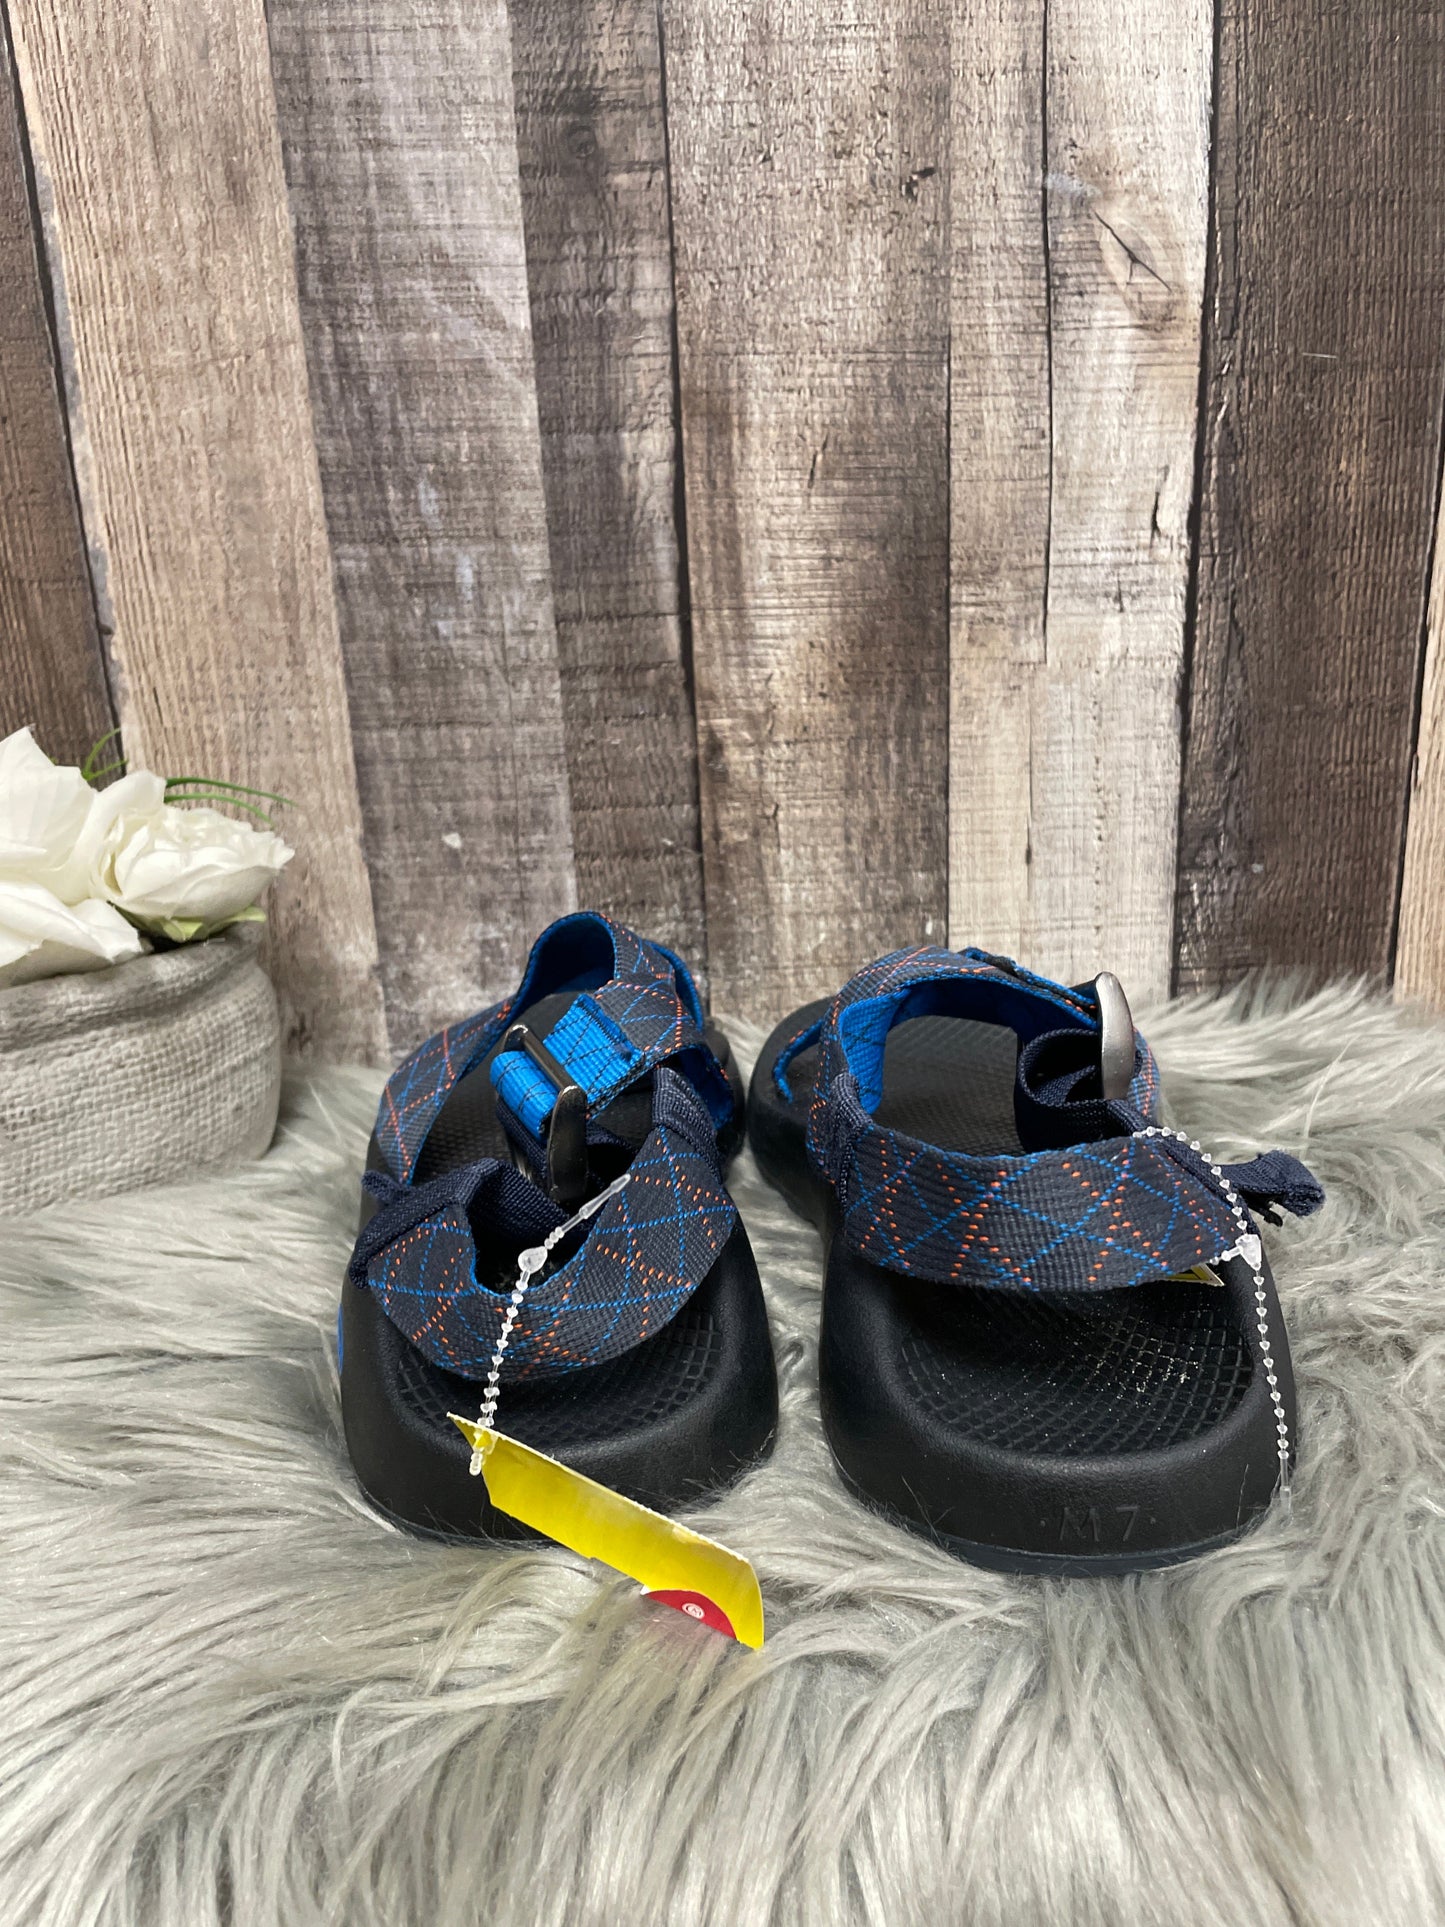 Navy Sandals Sport Chacos, Size 8.5